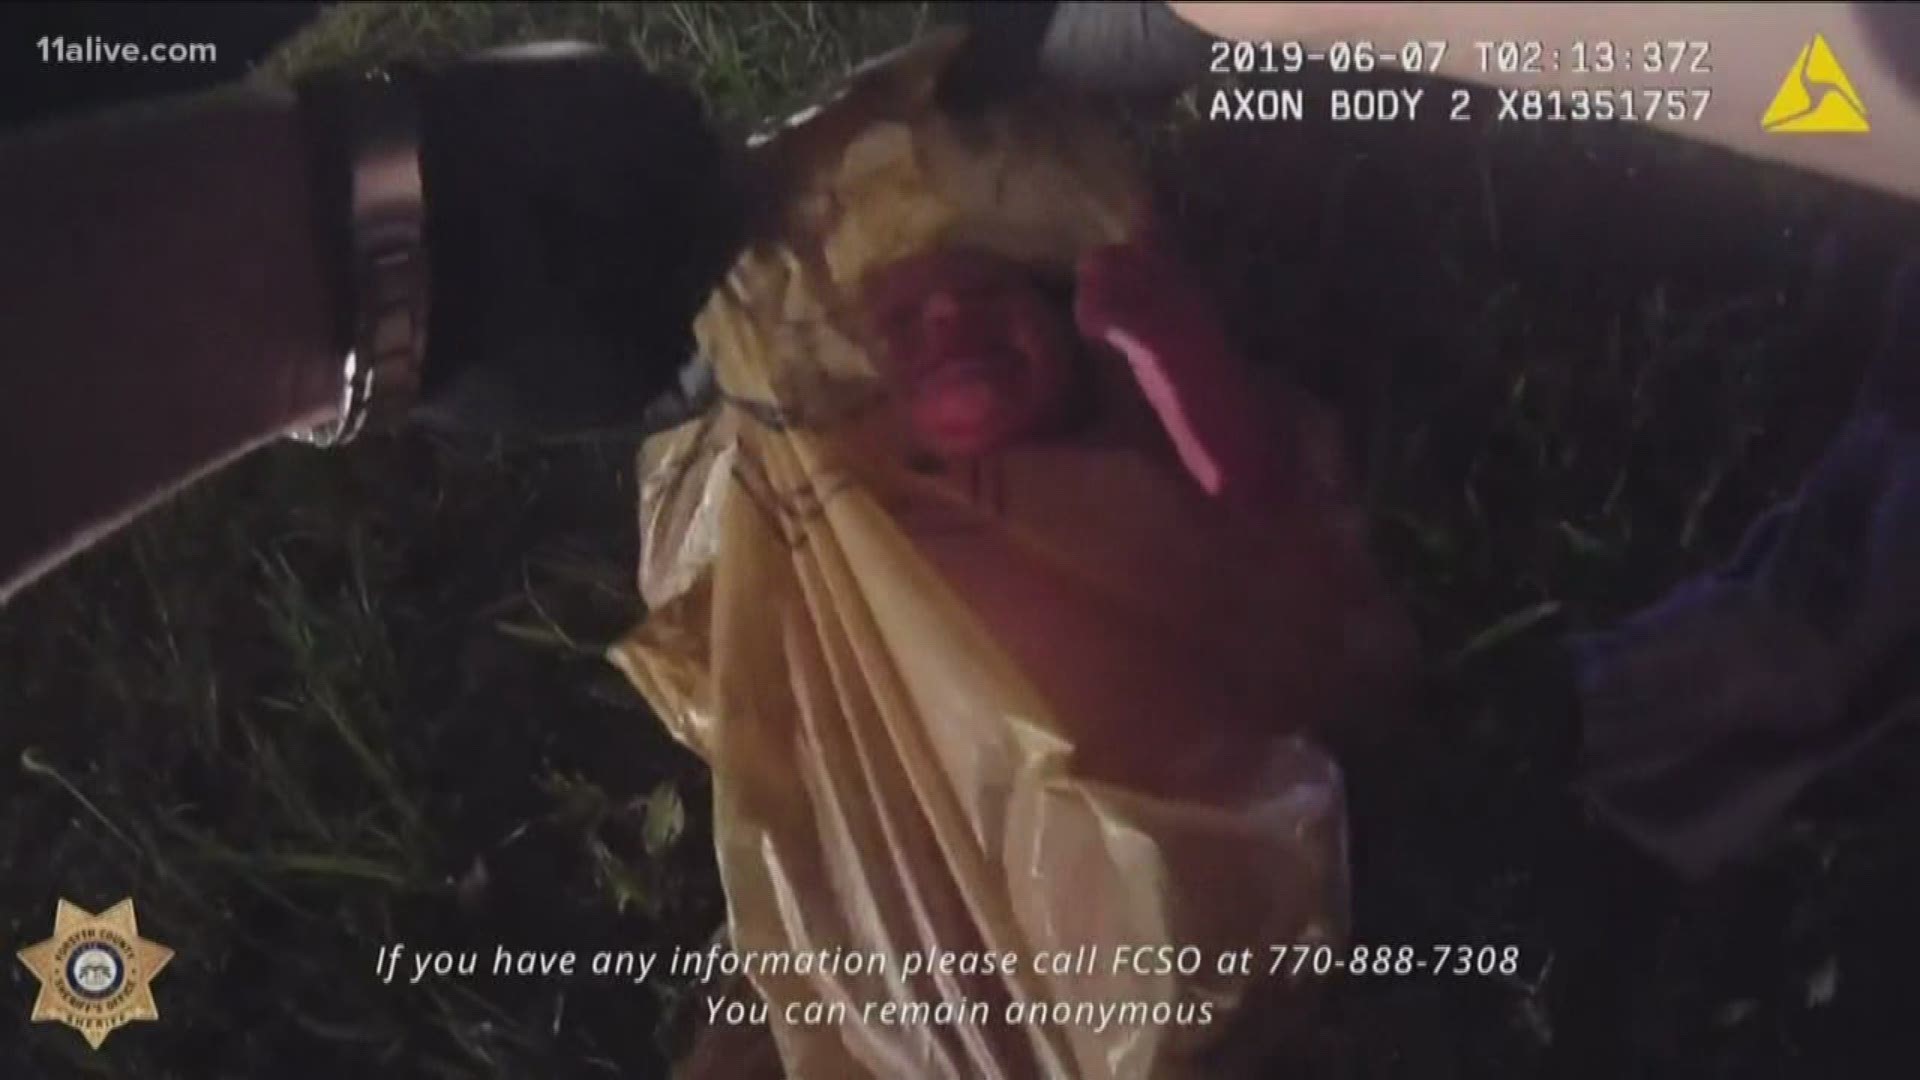 The Forsyth County Sheriff’s Office released the video as they continue to search for the possible mother of the child.